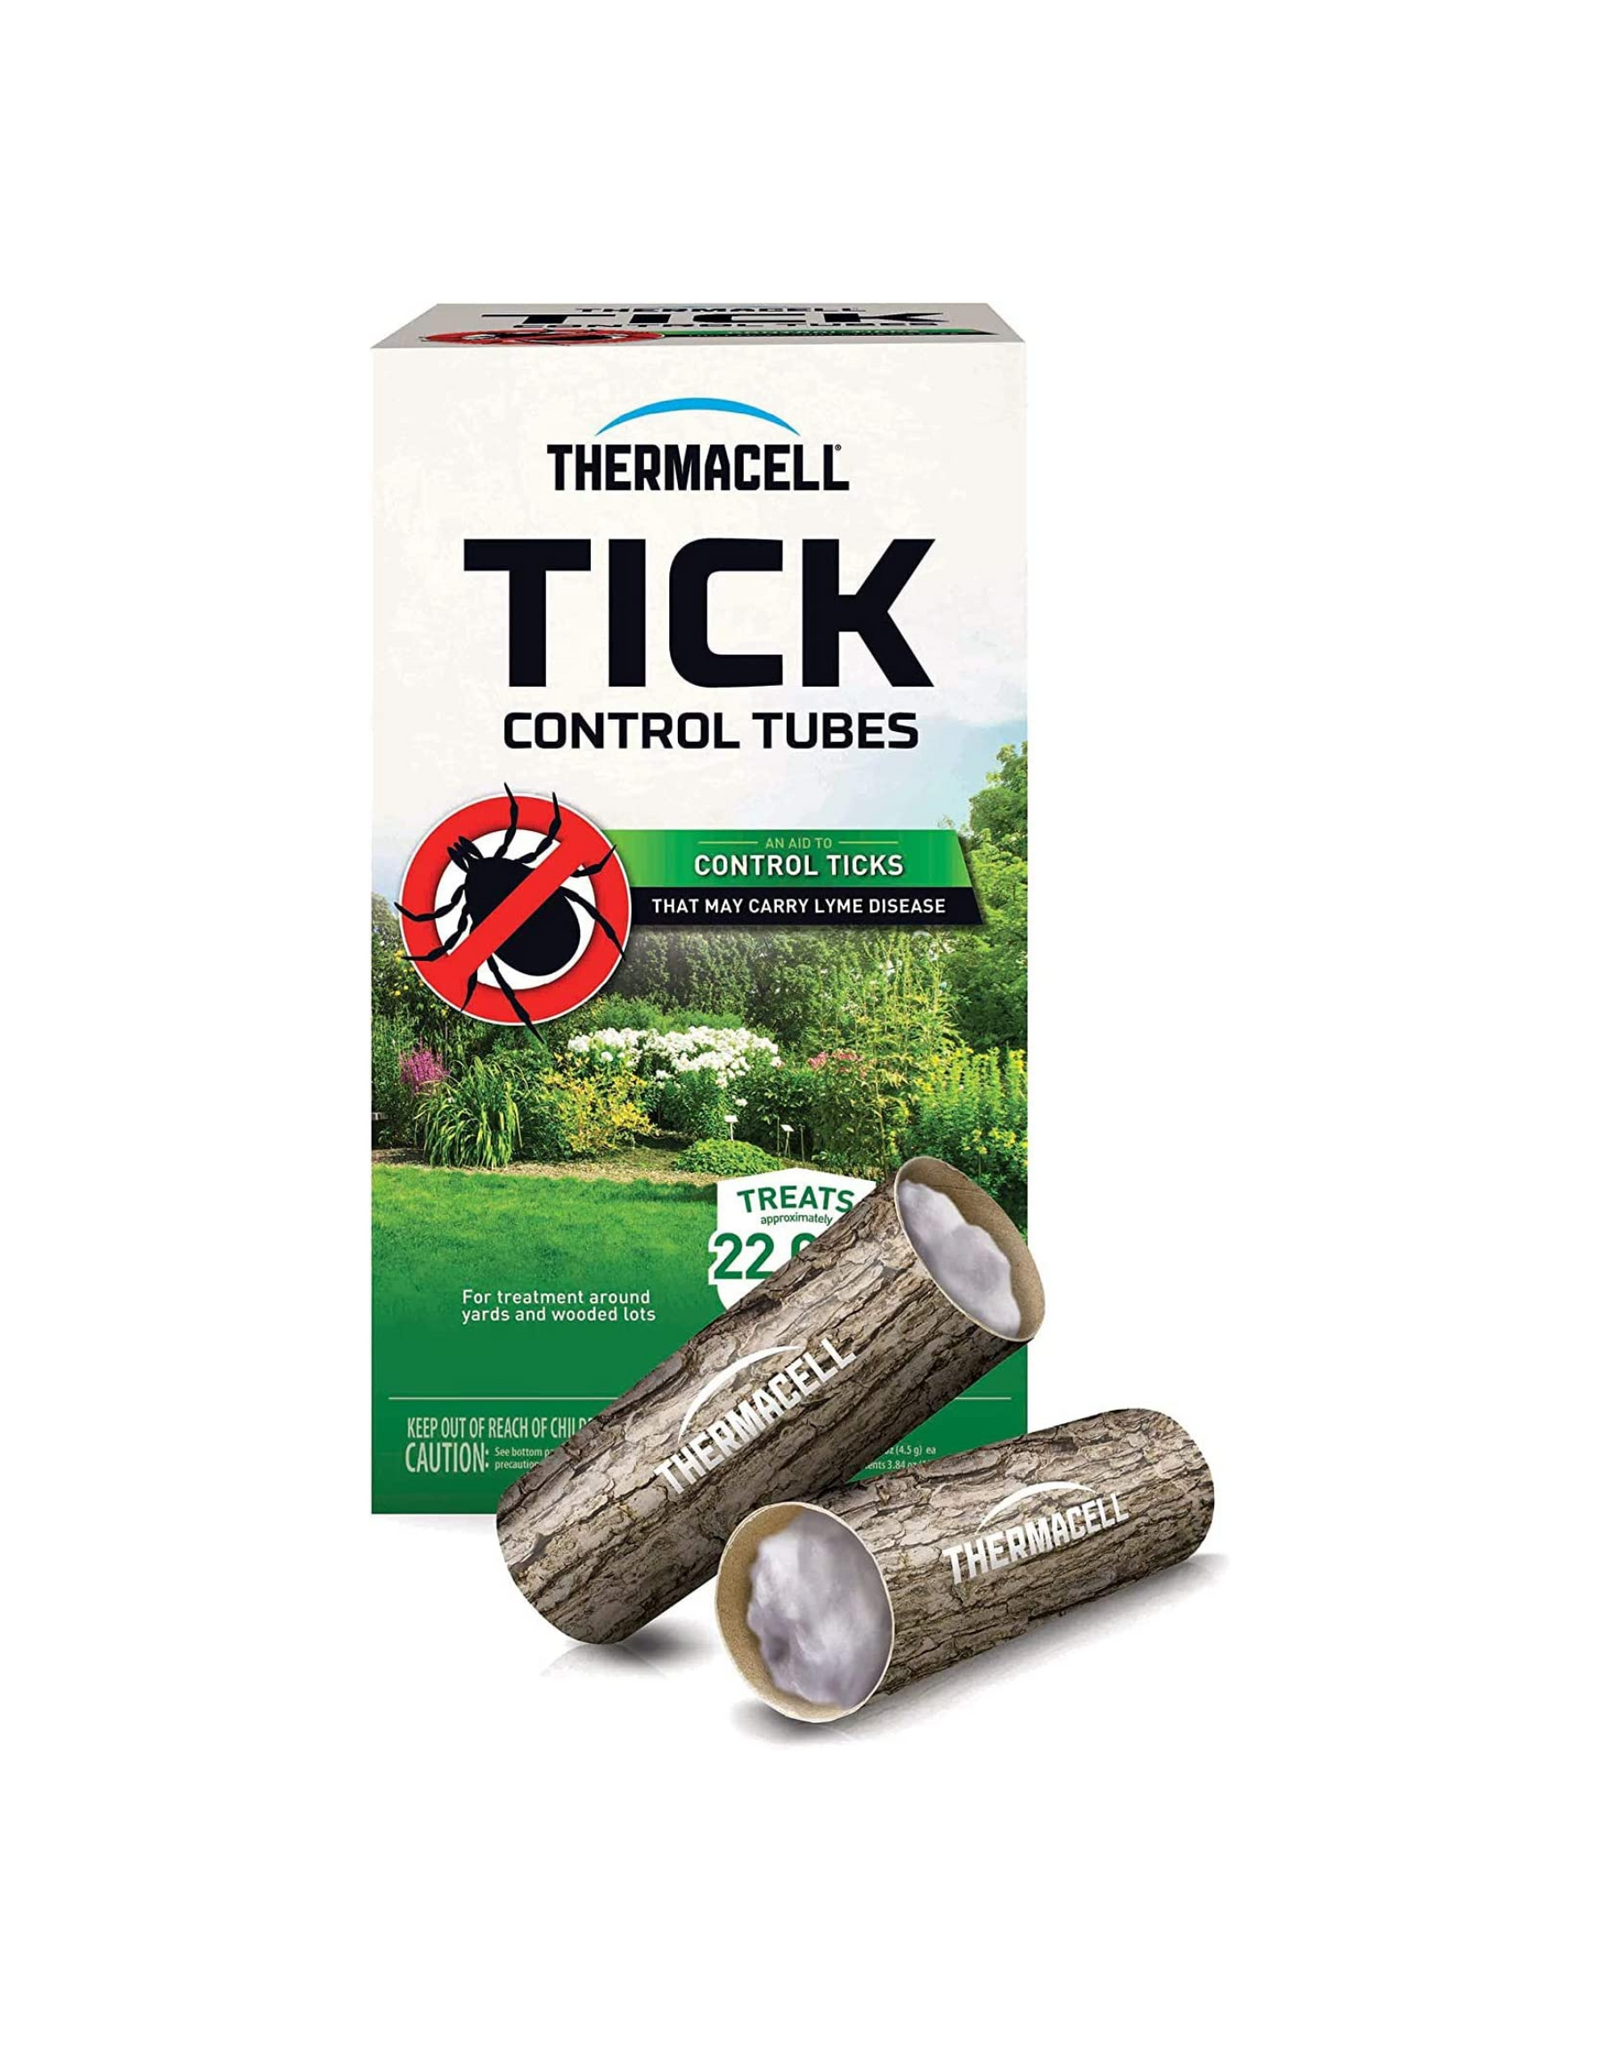 Thermacell Tick Control Tubes for Yards, Kills Ticks That May Carry Lyme Disease, 24 Tubes